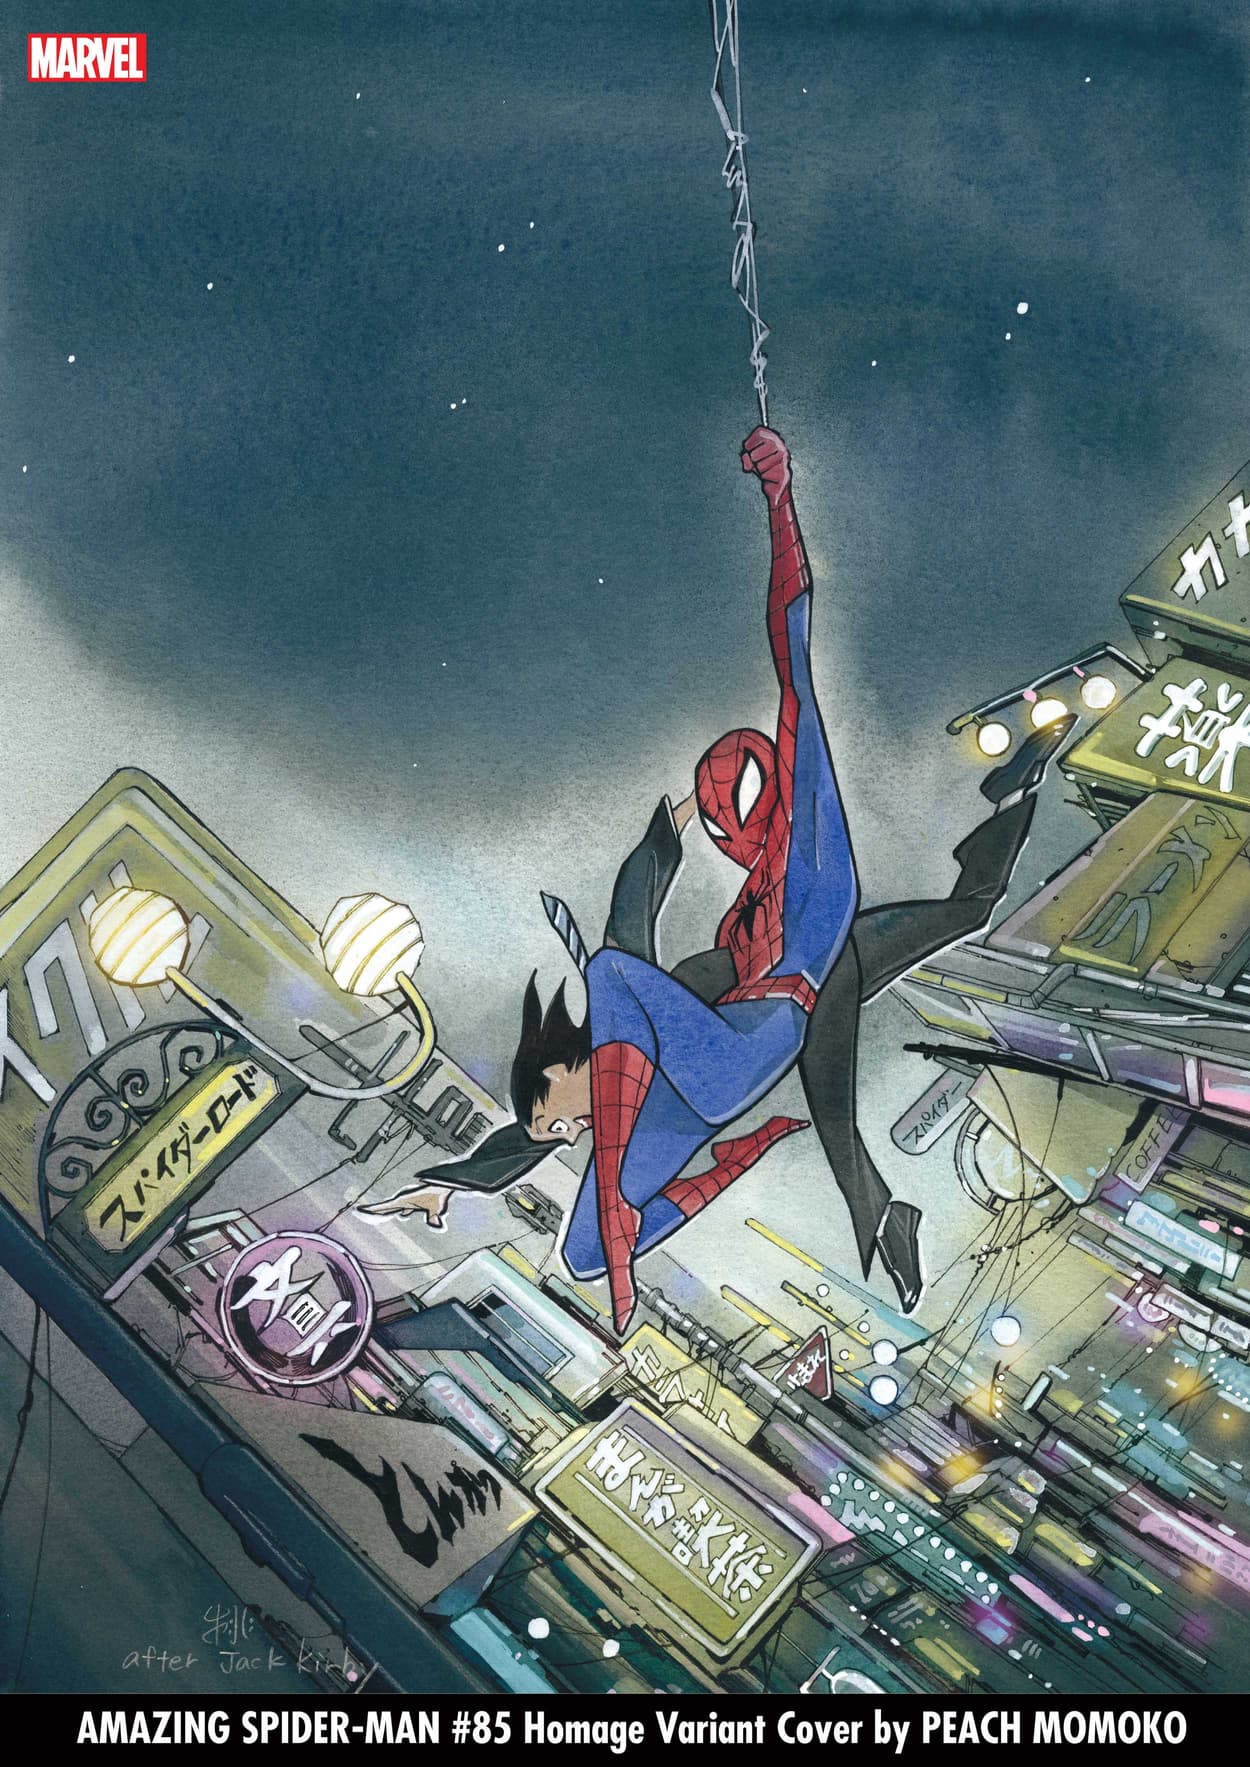 AMAZING SPIDER-MAN #85 Homage Variant Cover by PEACH MOMOKO